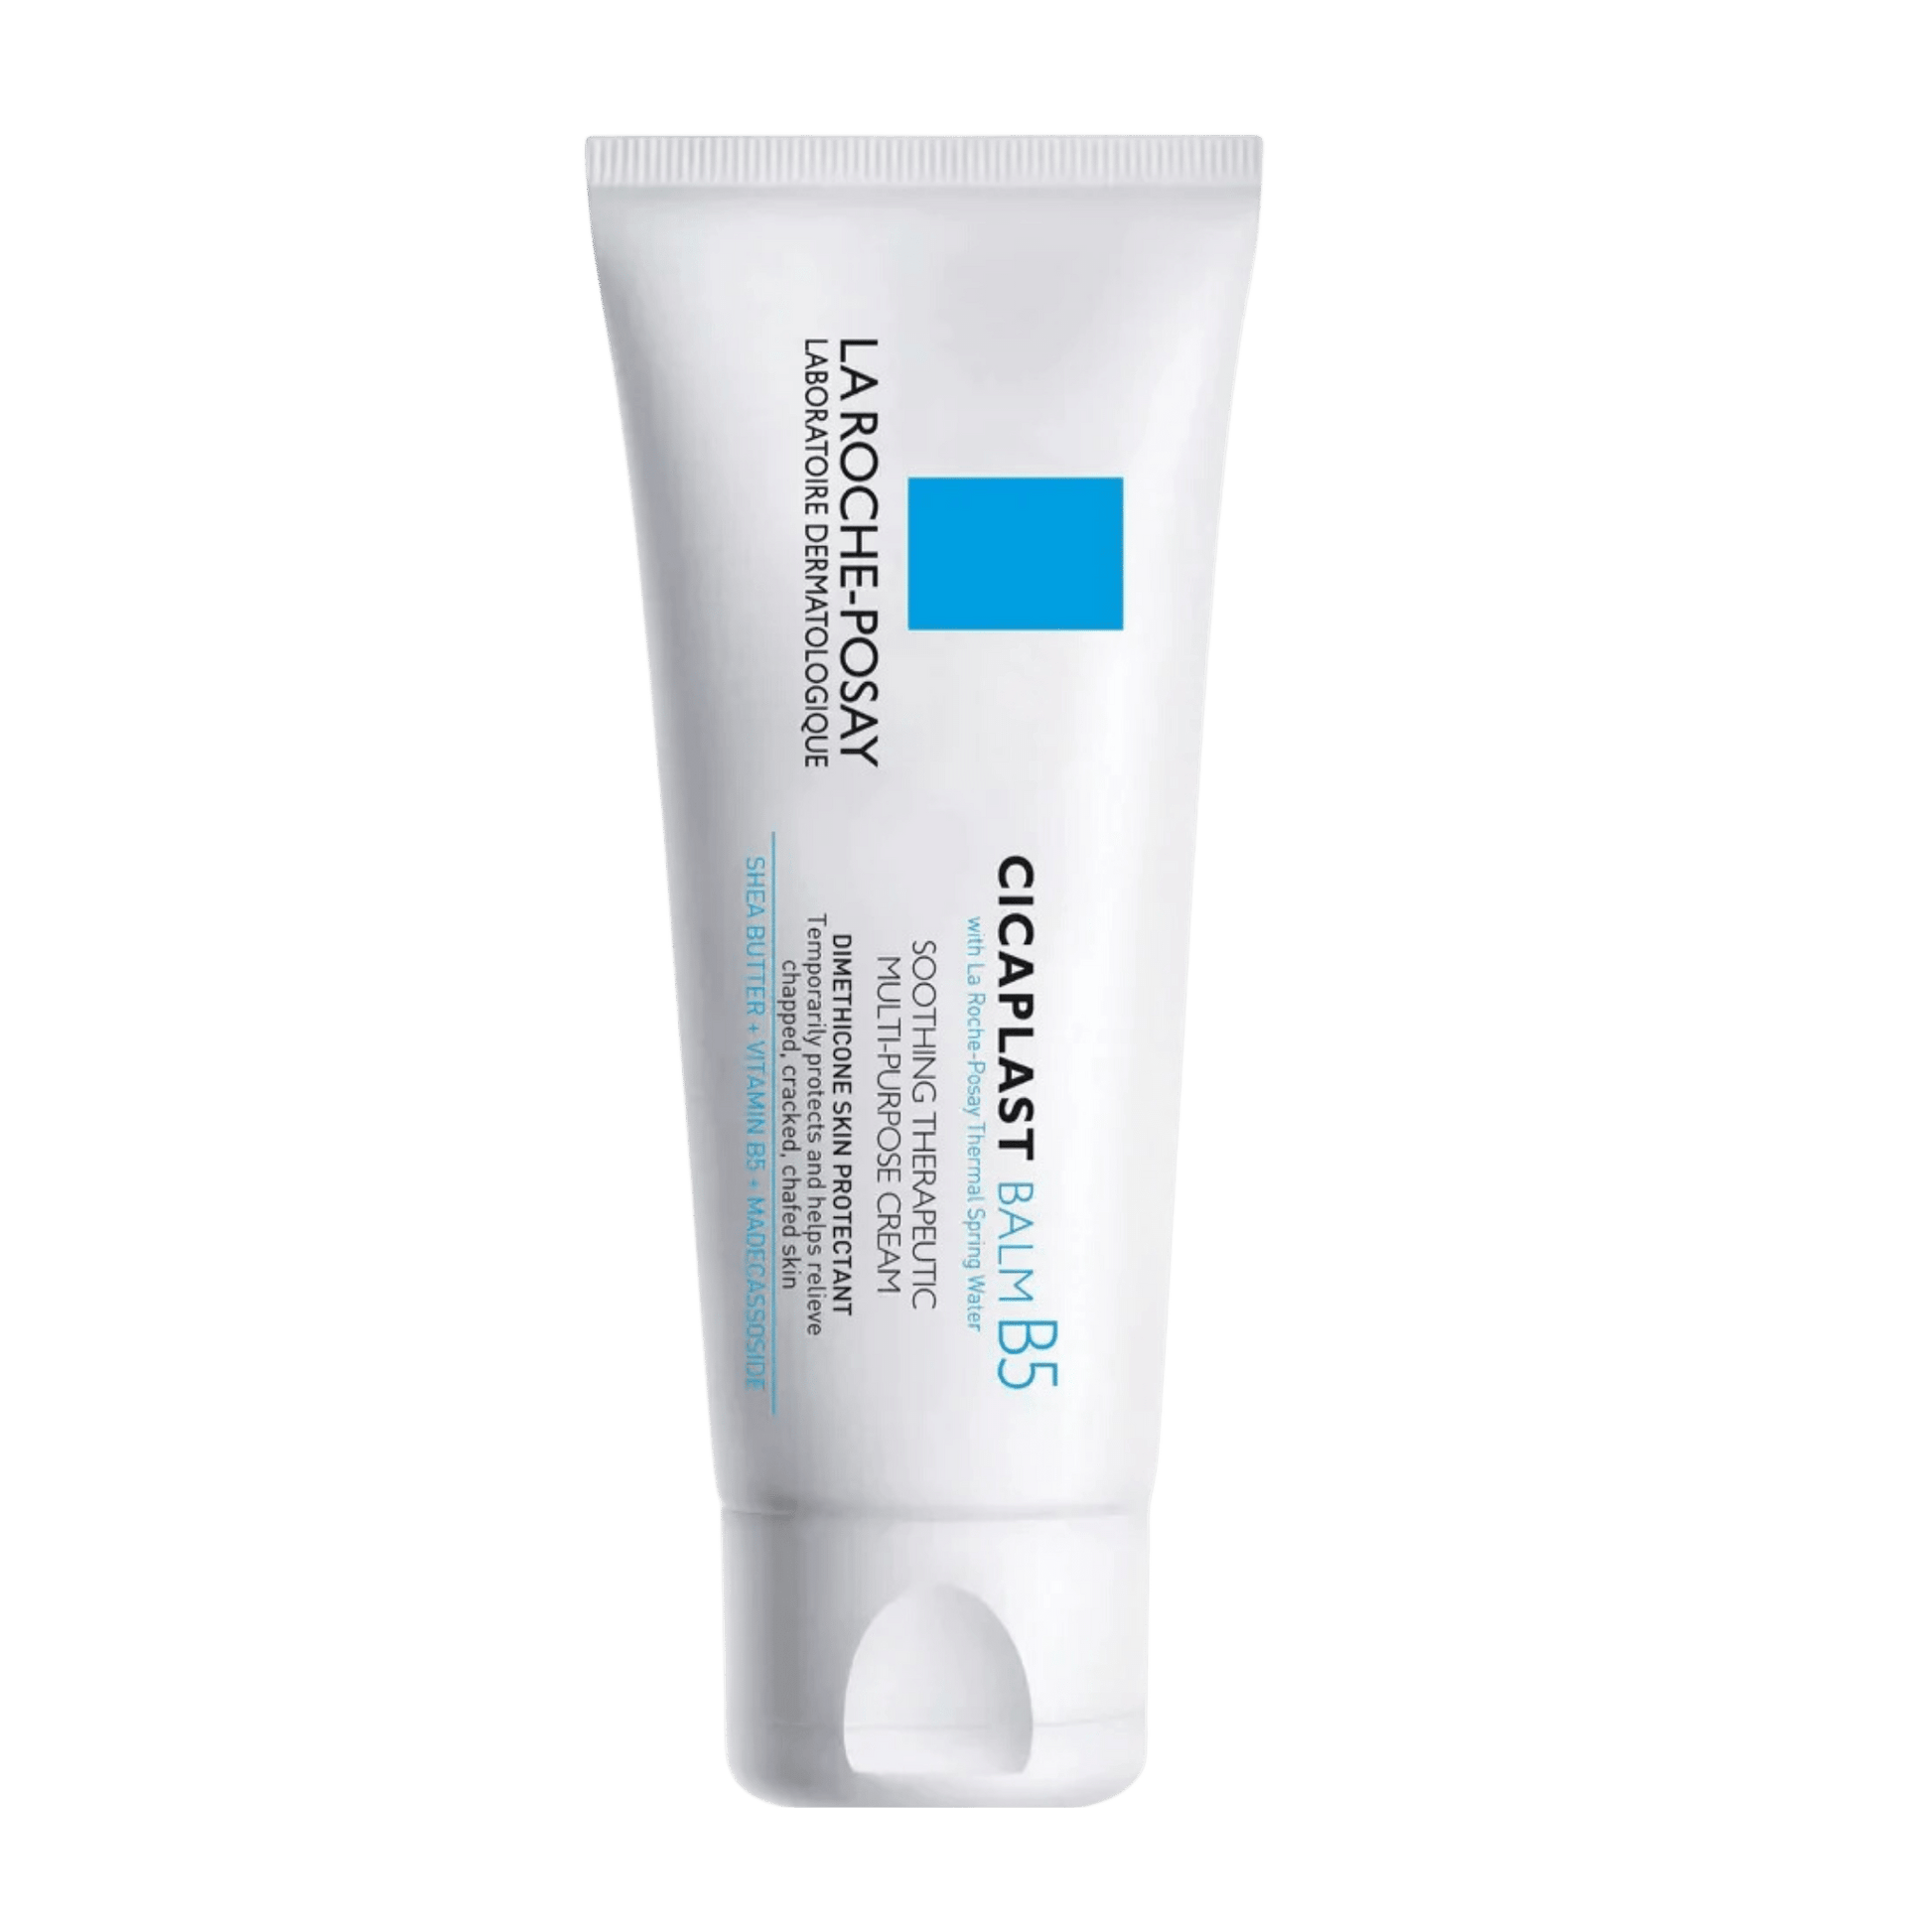 Get La Roche-Posay Cicaplast Balm B5, Soothing Therapeutic Multi Purpose Cream (40ml) Delivered at Your Doorstep 